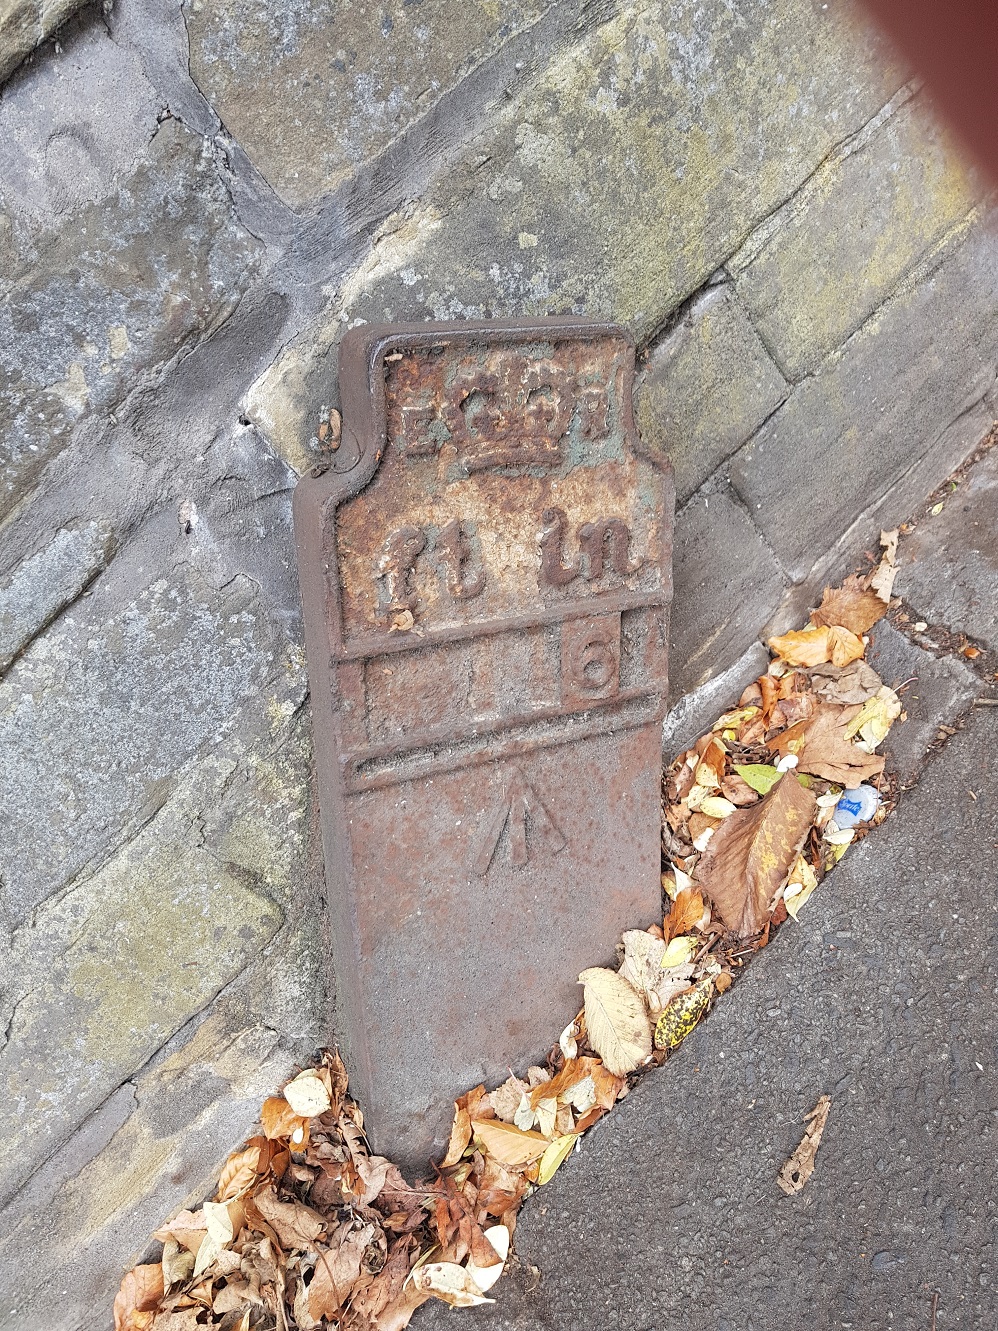 Telegraph cable marker post at 447 New Bury Road, Manchester by Simon C-S 